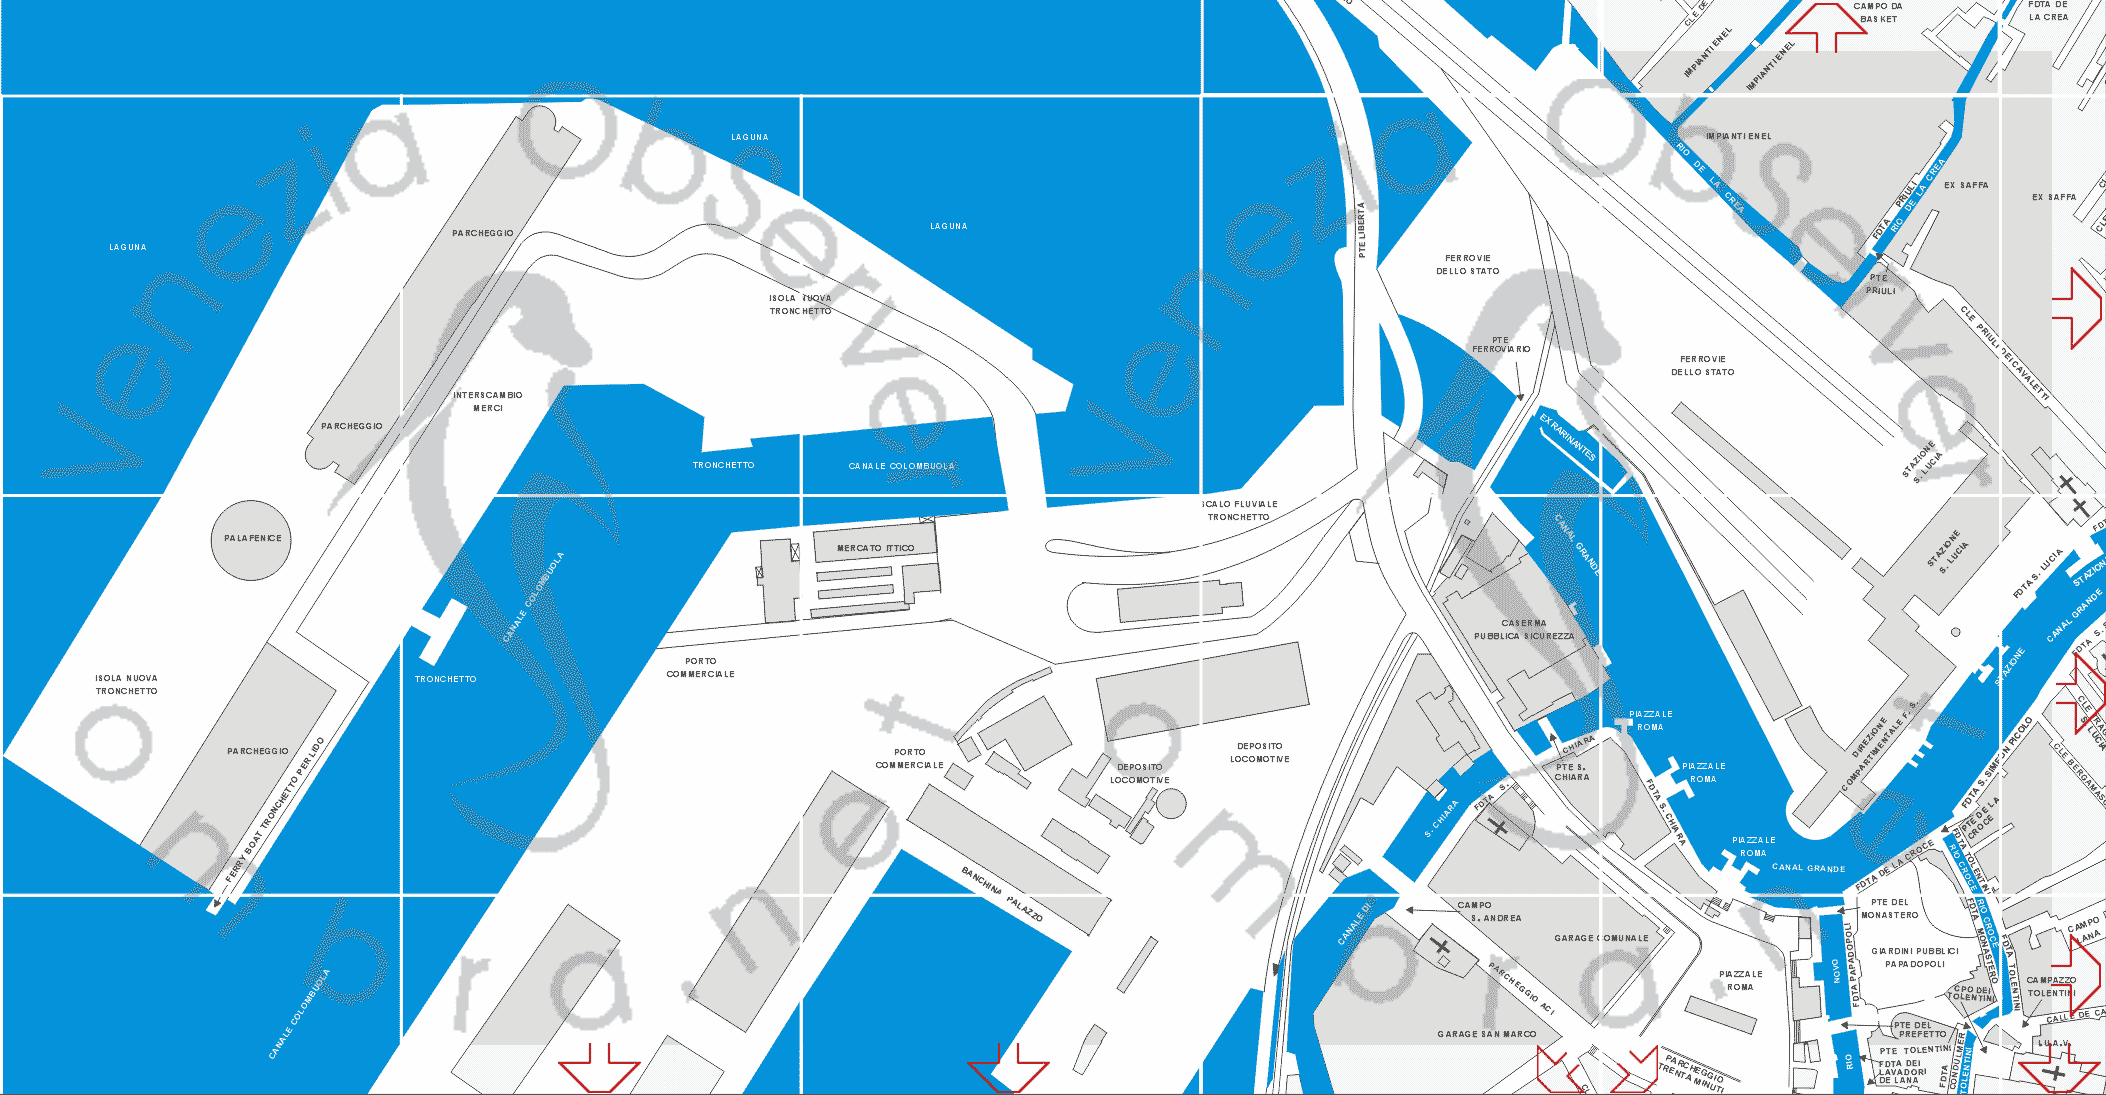 map of Venice Tronchetto Piazzale Roma Ferrovia with venetian itineraries